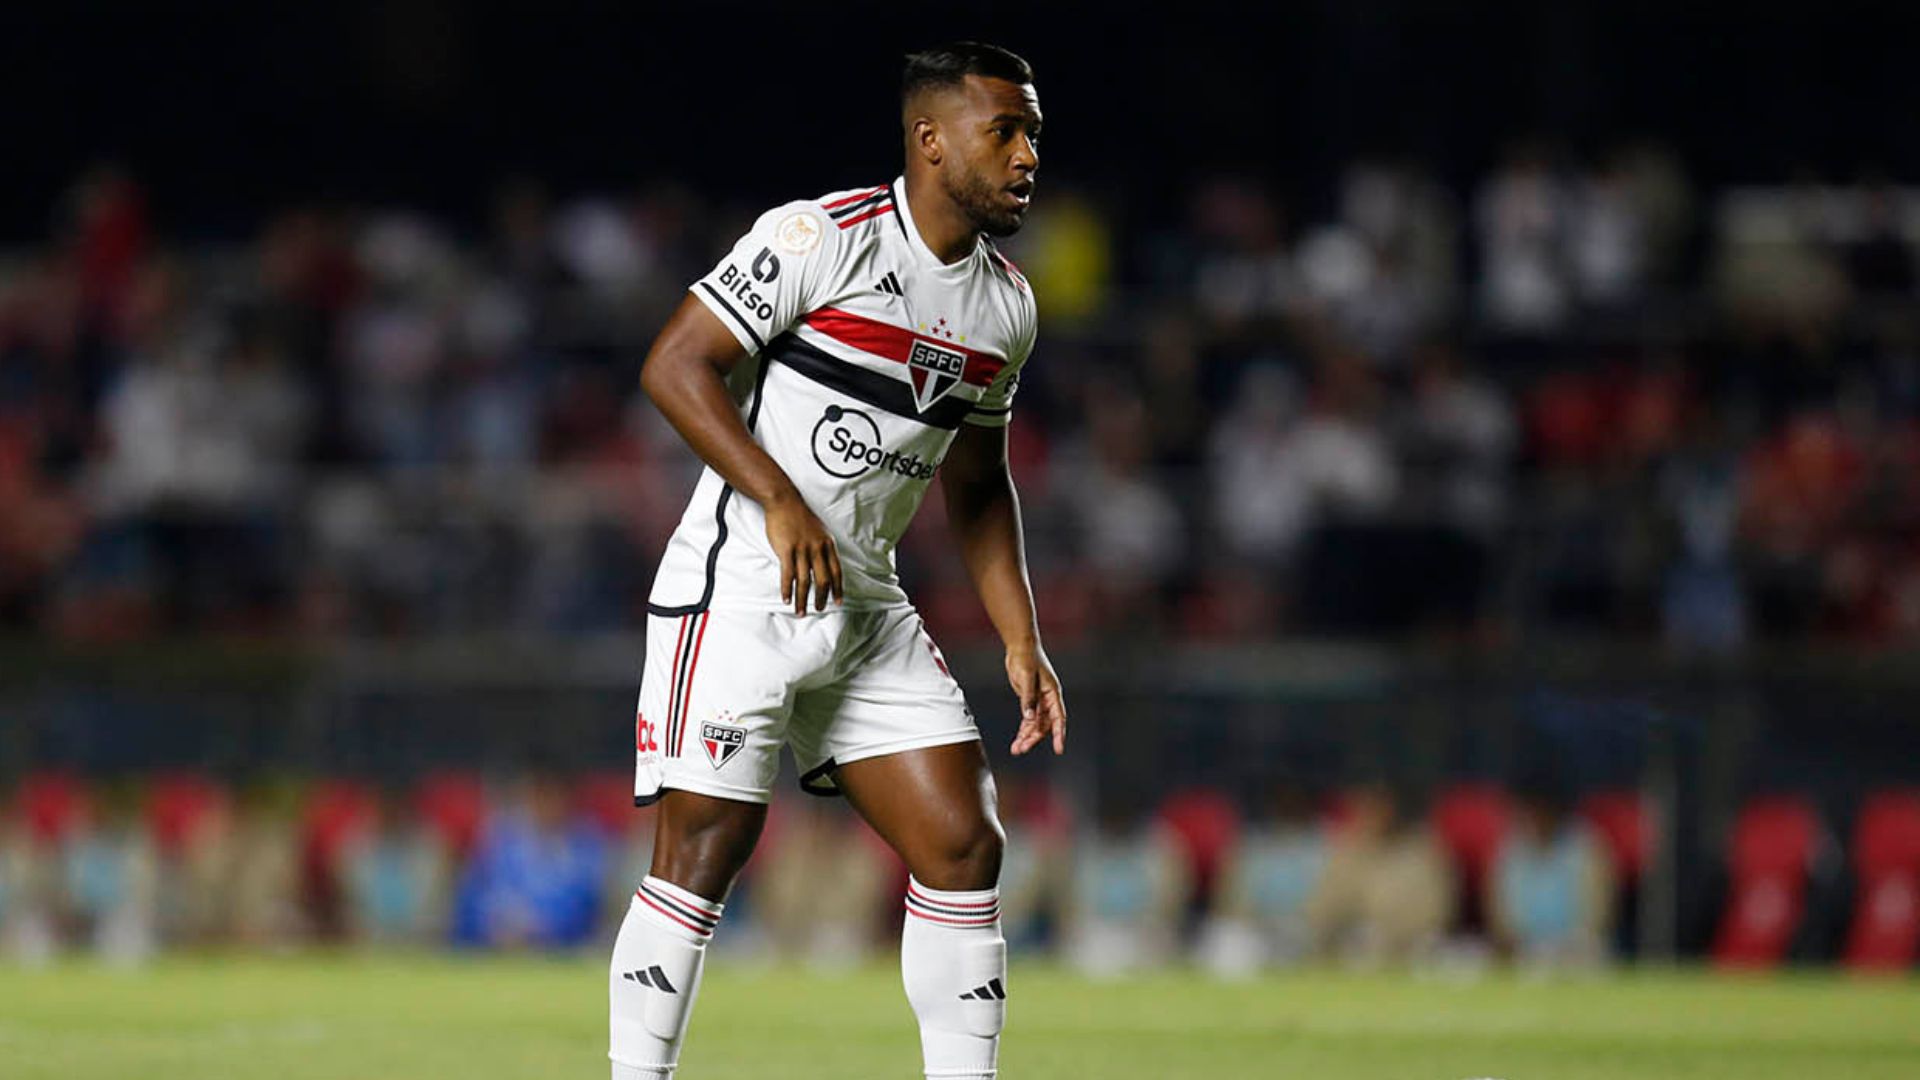 Luan in action for São Paulo, against América-MG (Credit: Getty Images)